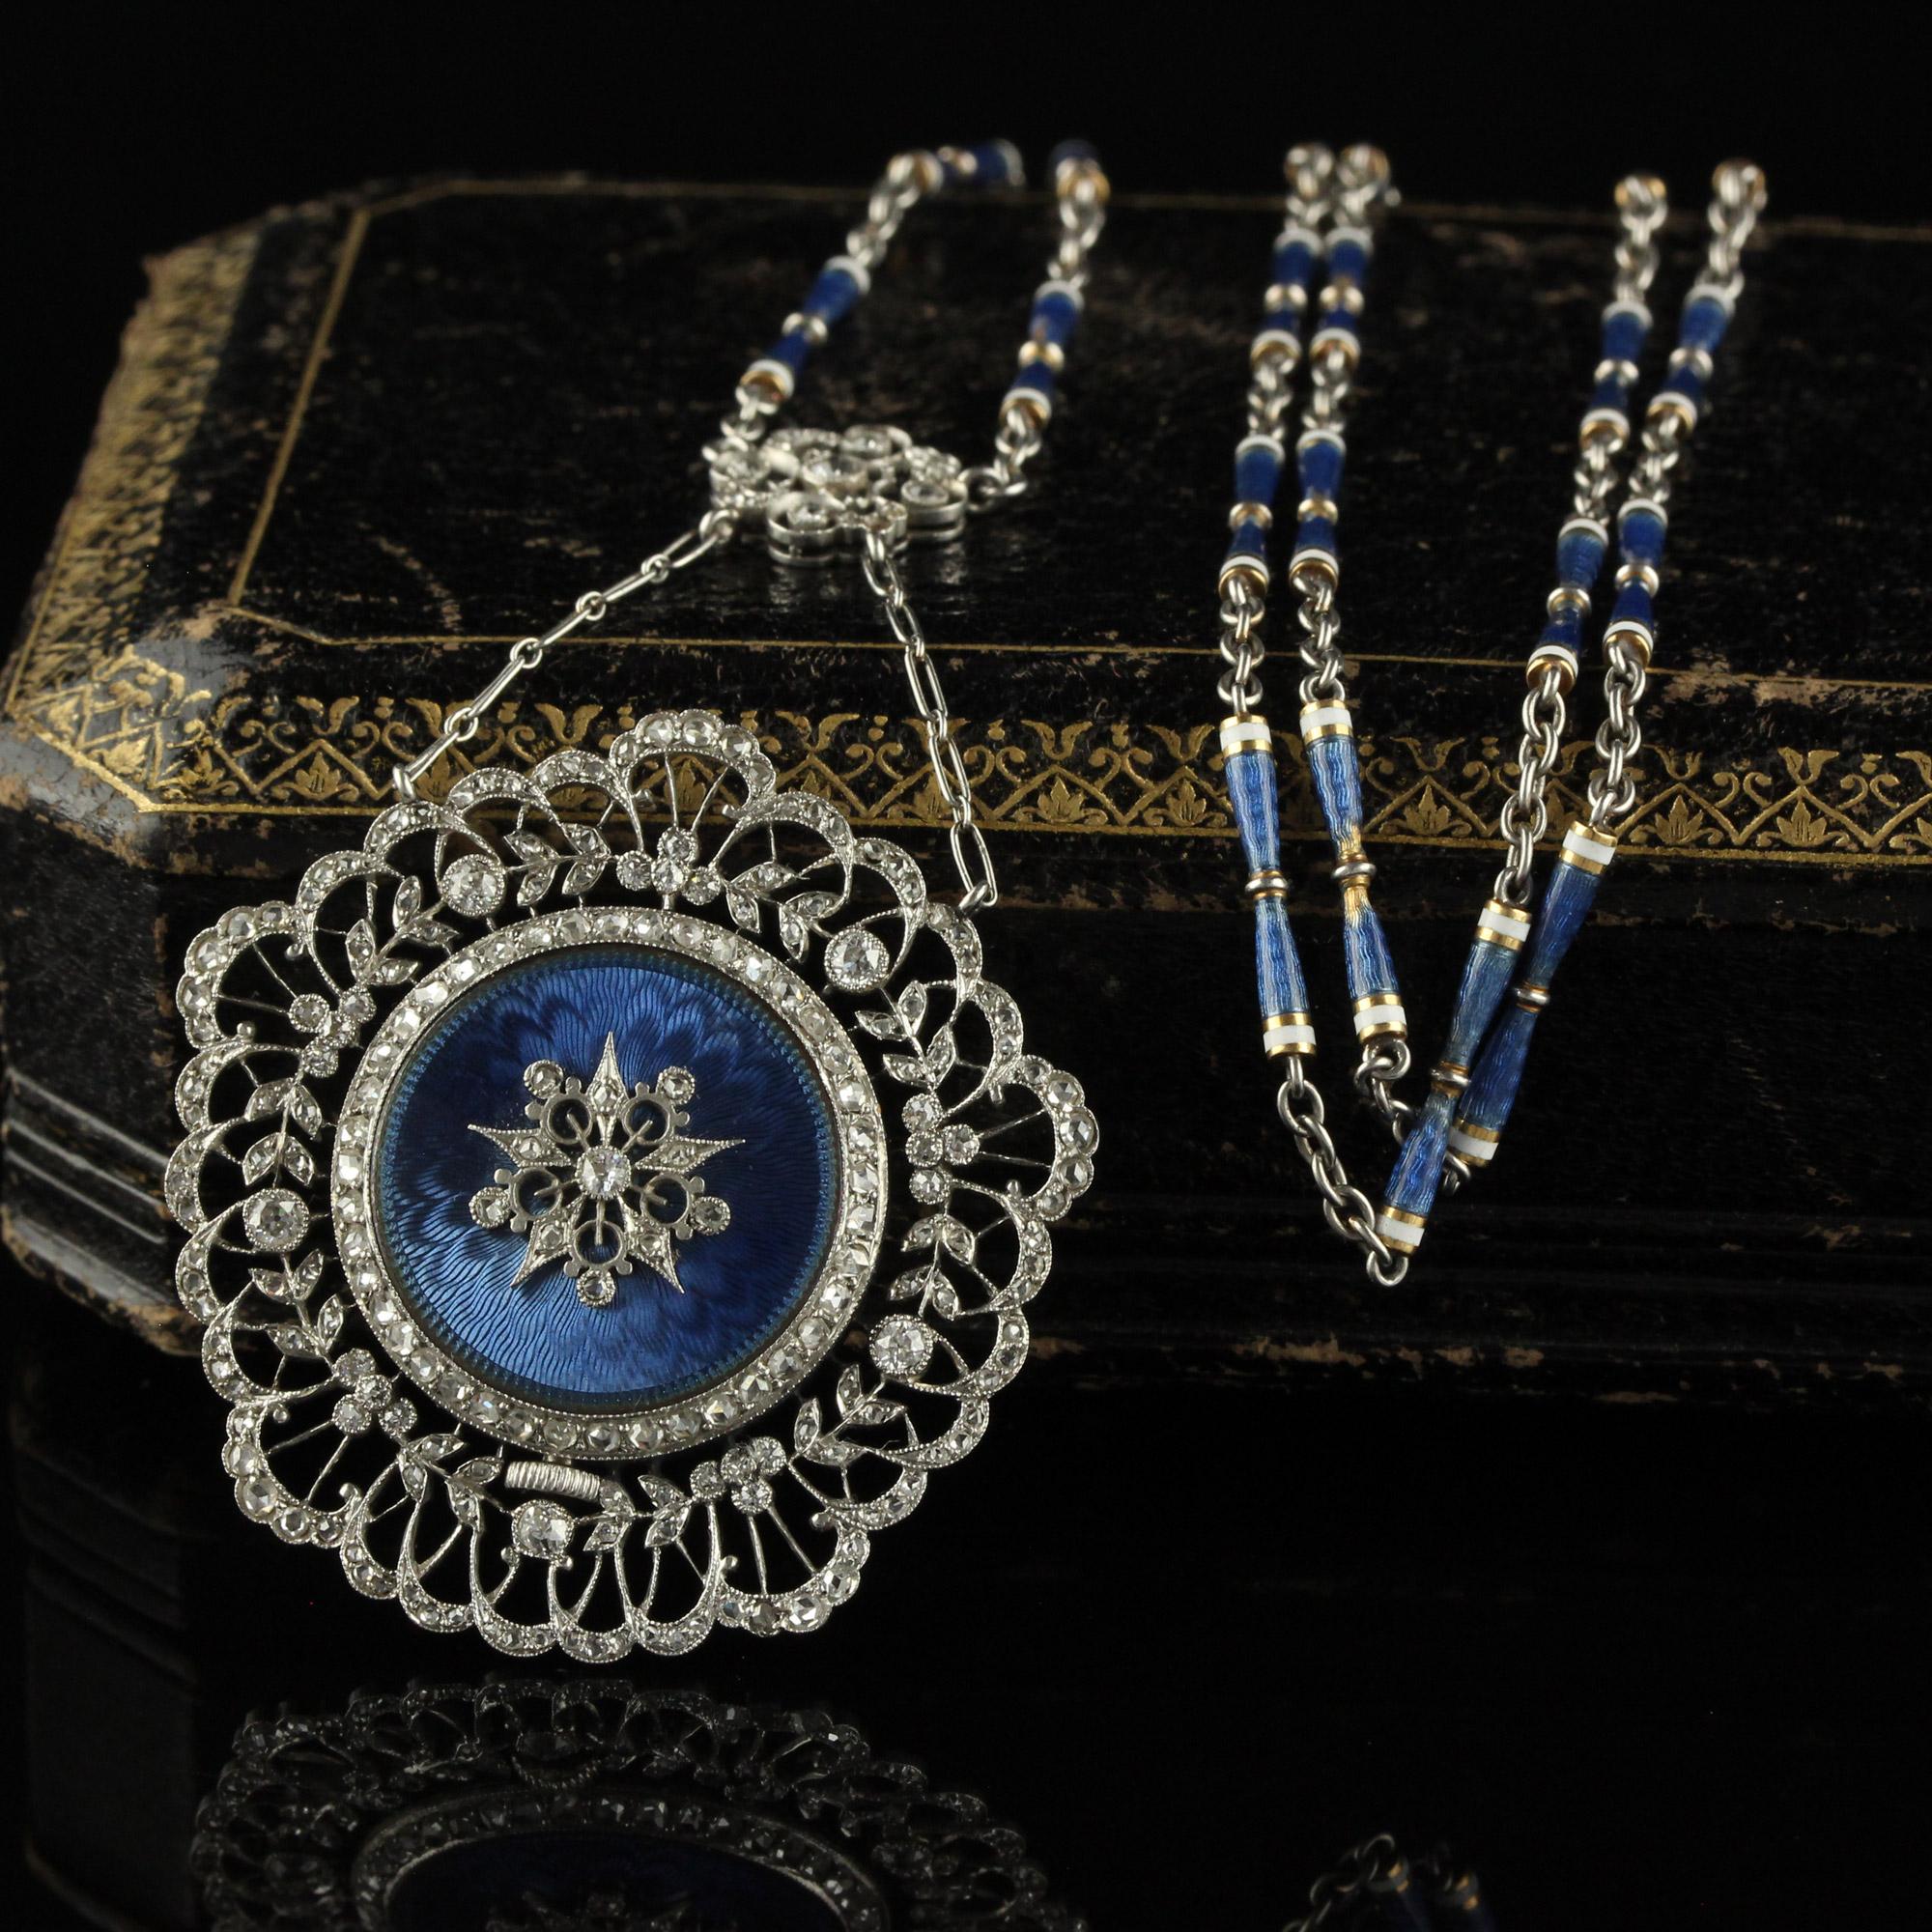 Beautiful Antique Edwardian Tiffany Co Diamond Enamel Filigree Guilloche Watch Necklace. This incredible one of a kind Tiffany and Co watch necklace is crafted in platinum. This gorgeous piece features gorgeous Guilloche enamel throughout the entire